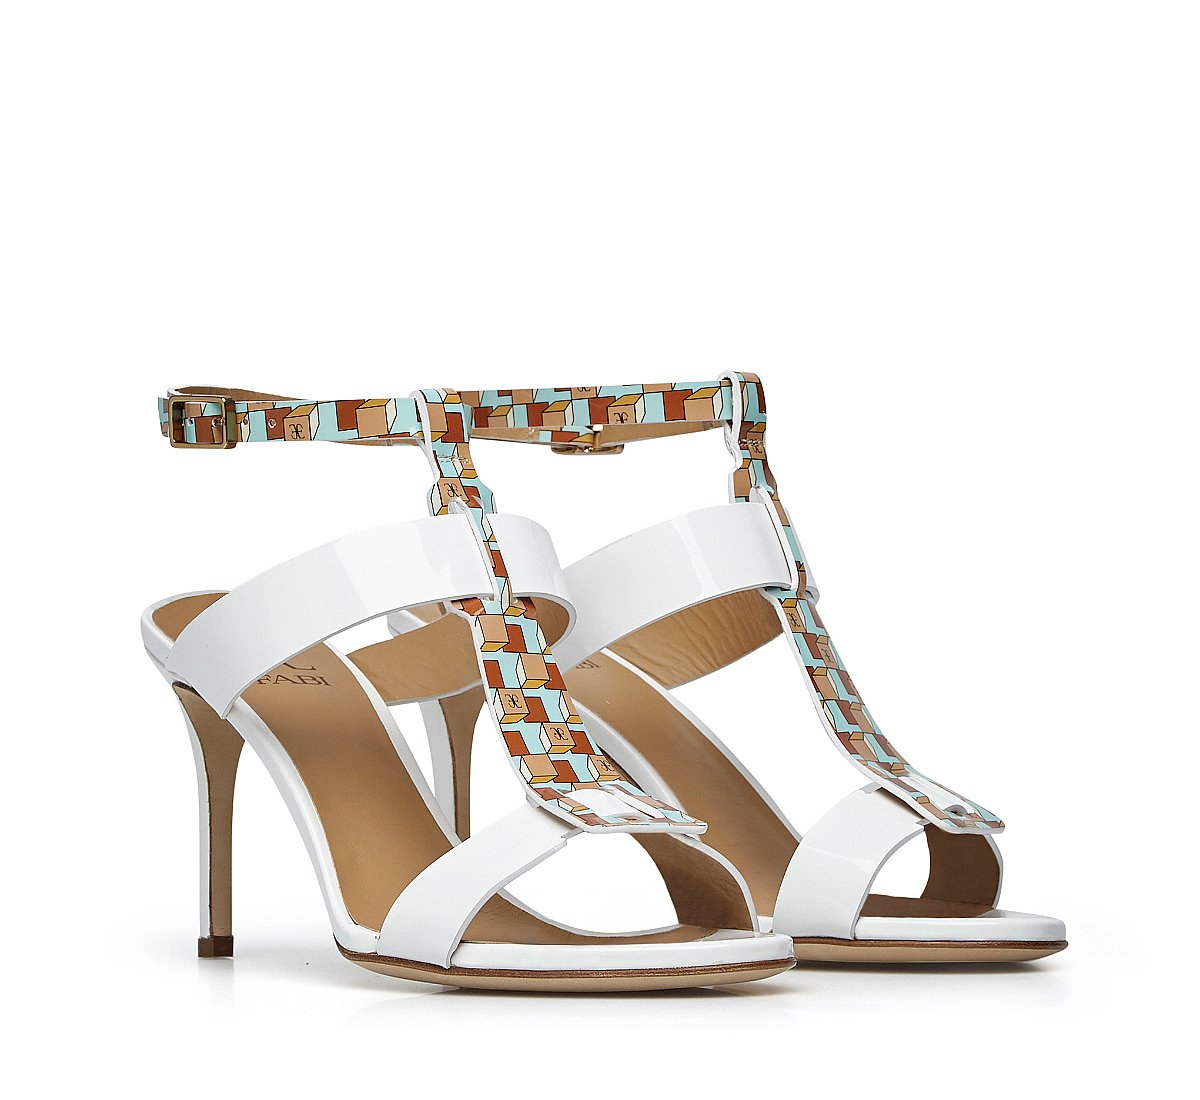 Sandal in patent leather